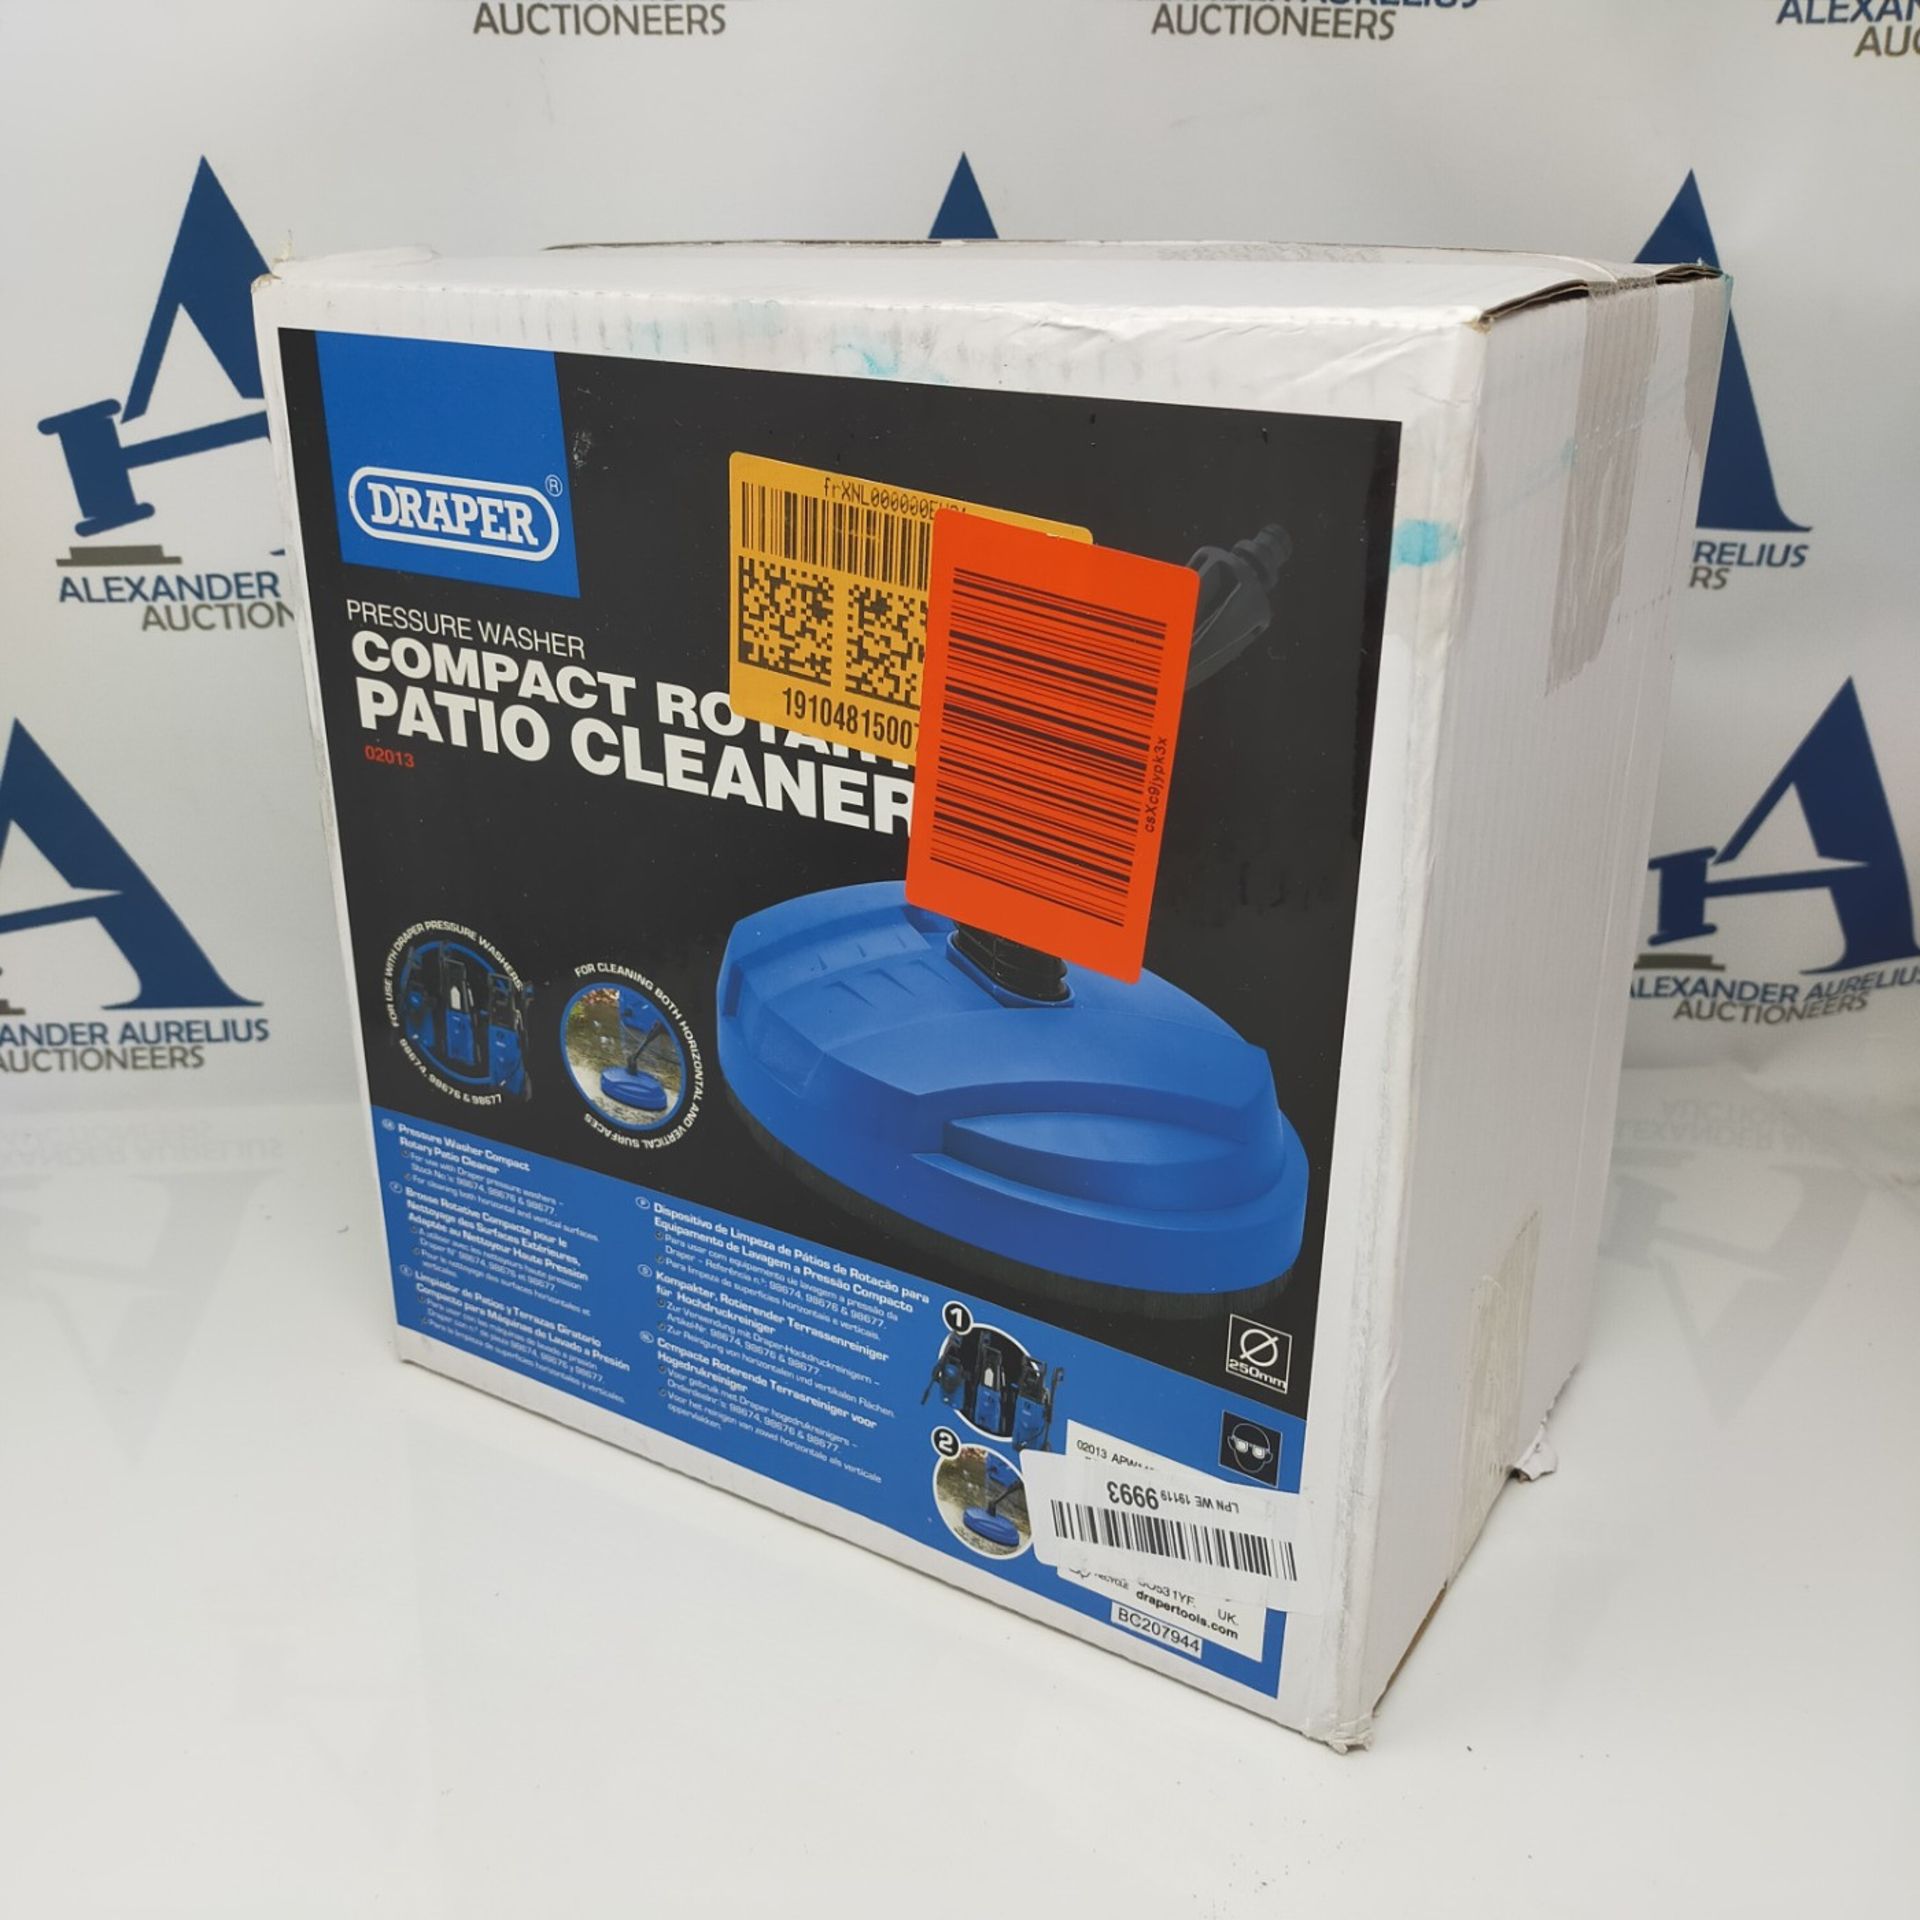 Draper 02013 Pressure Washer Compact Rotary Patio Cleaner, Blue - Image 2 of 3